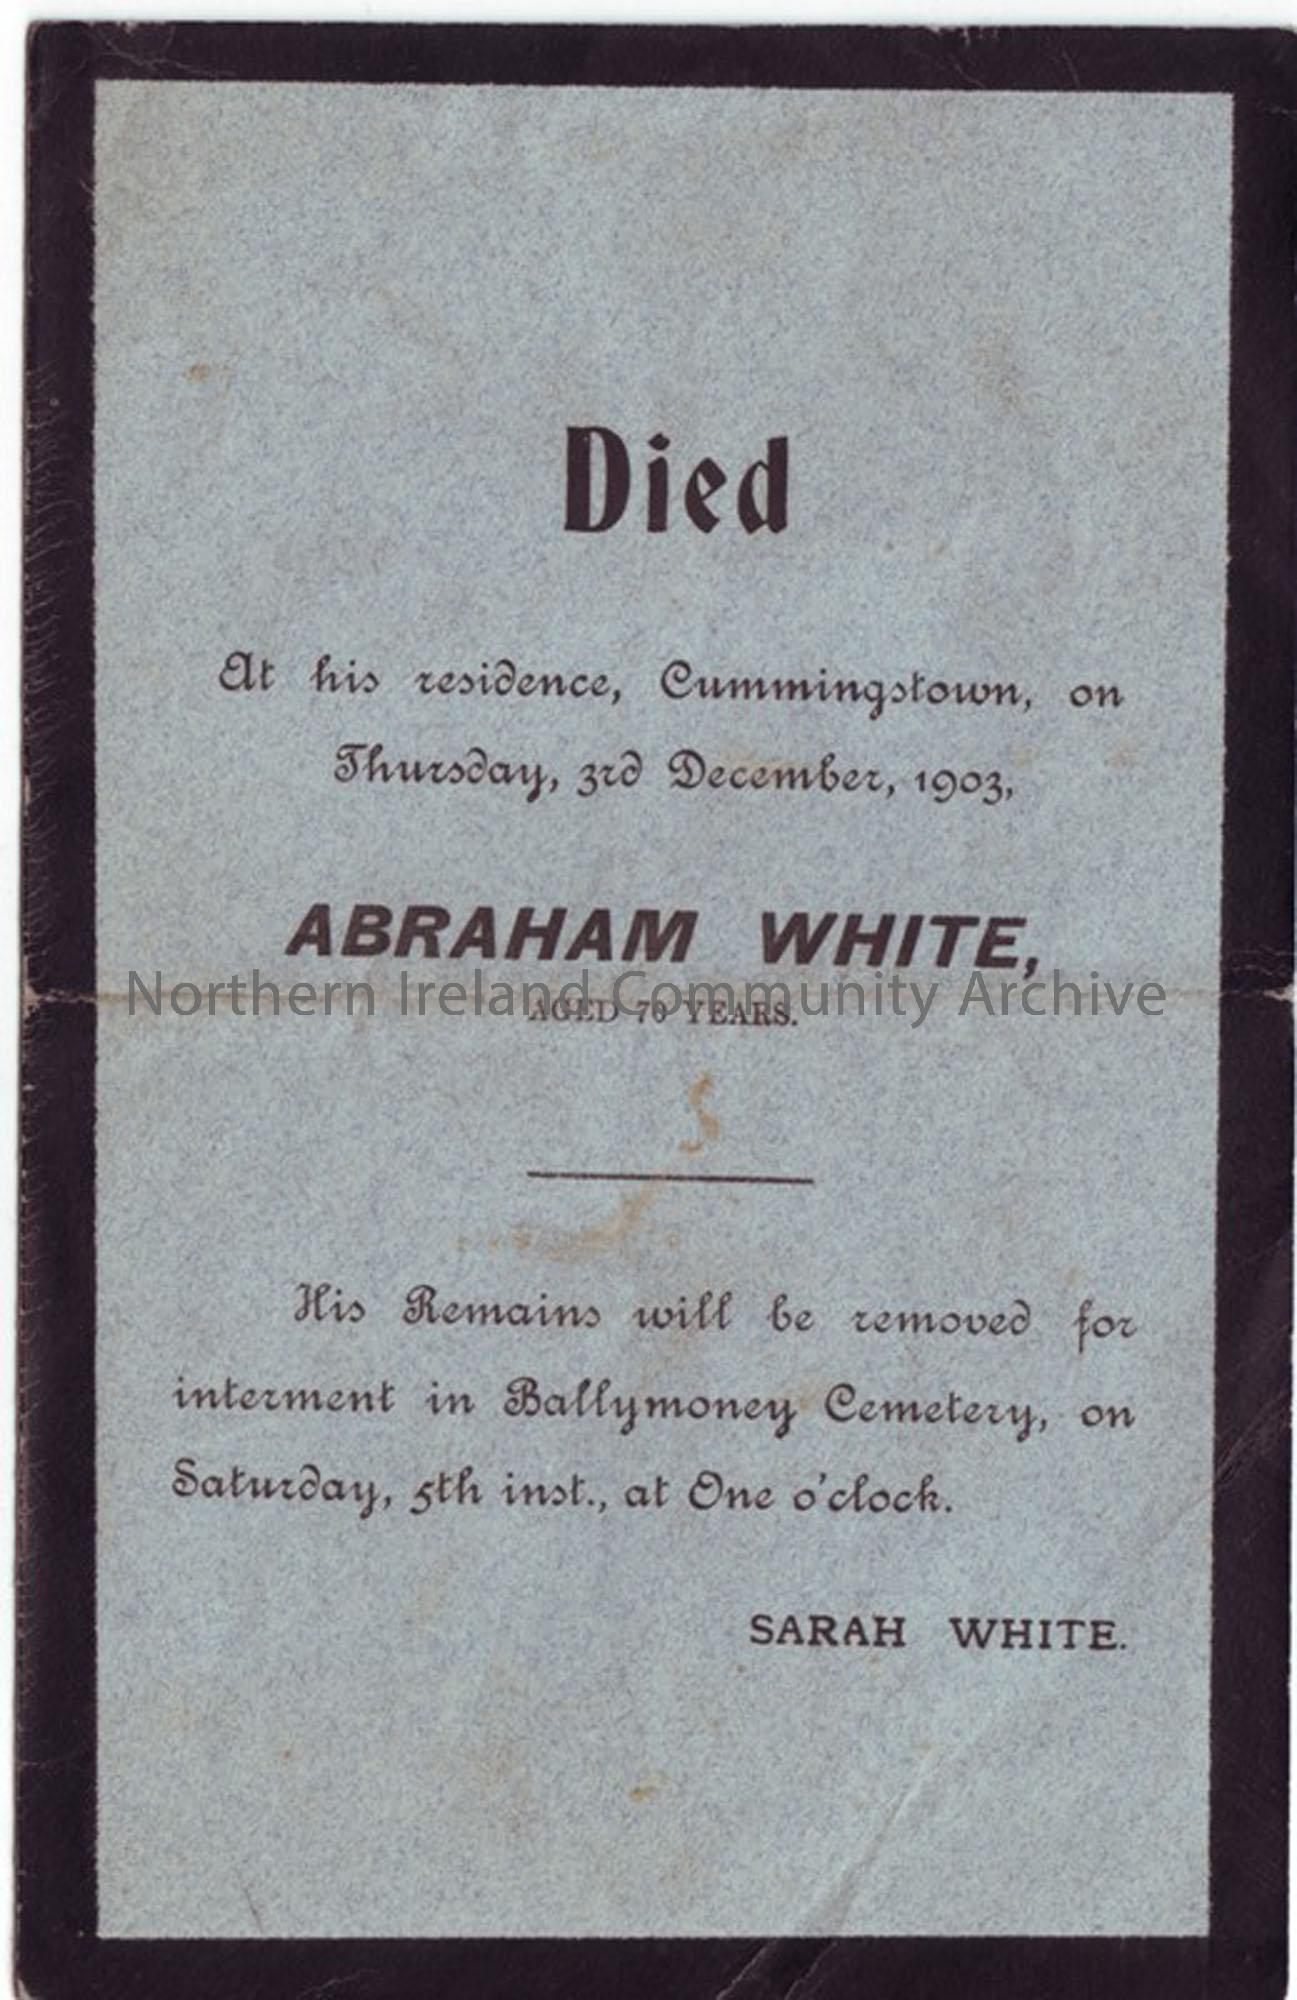 Abraham White of Cummingstown, buried in Ballymoney Cemetery d. 3rd December 1903, aged 70 years